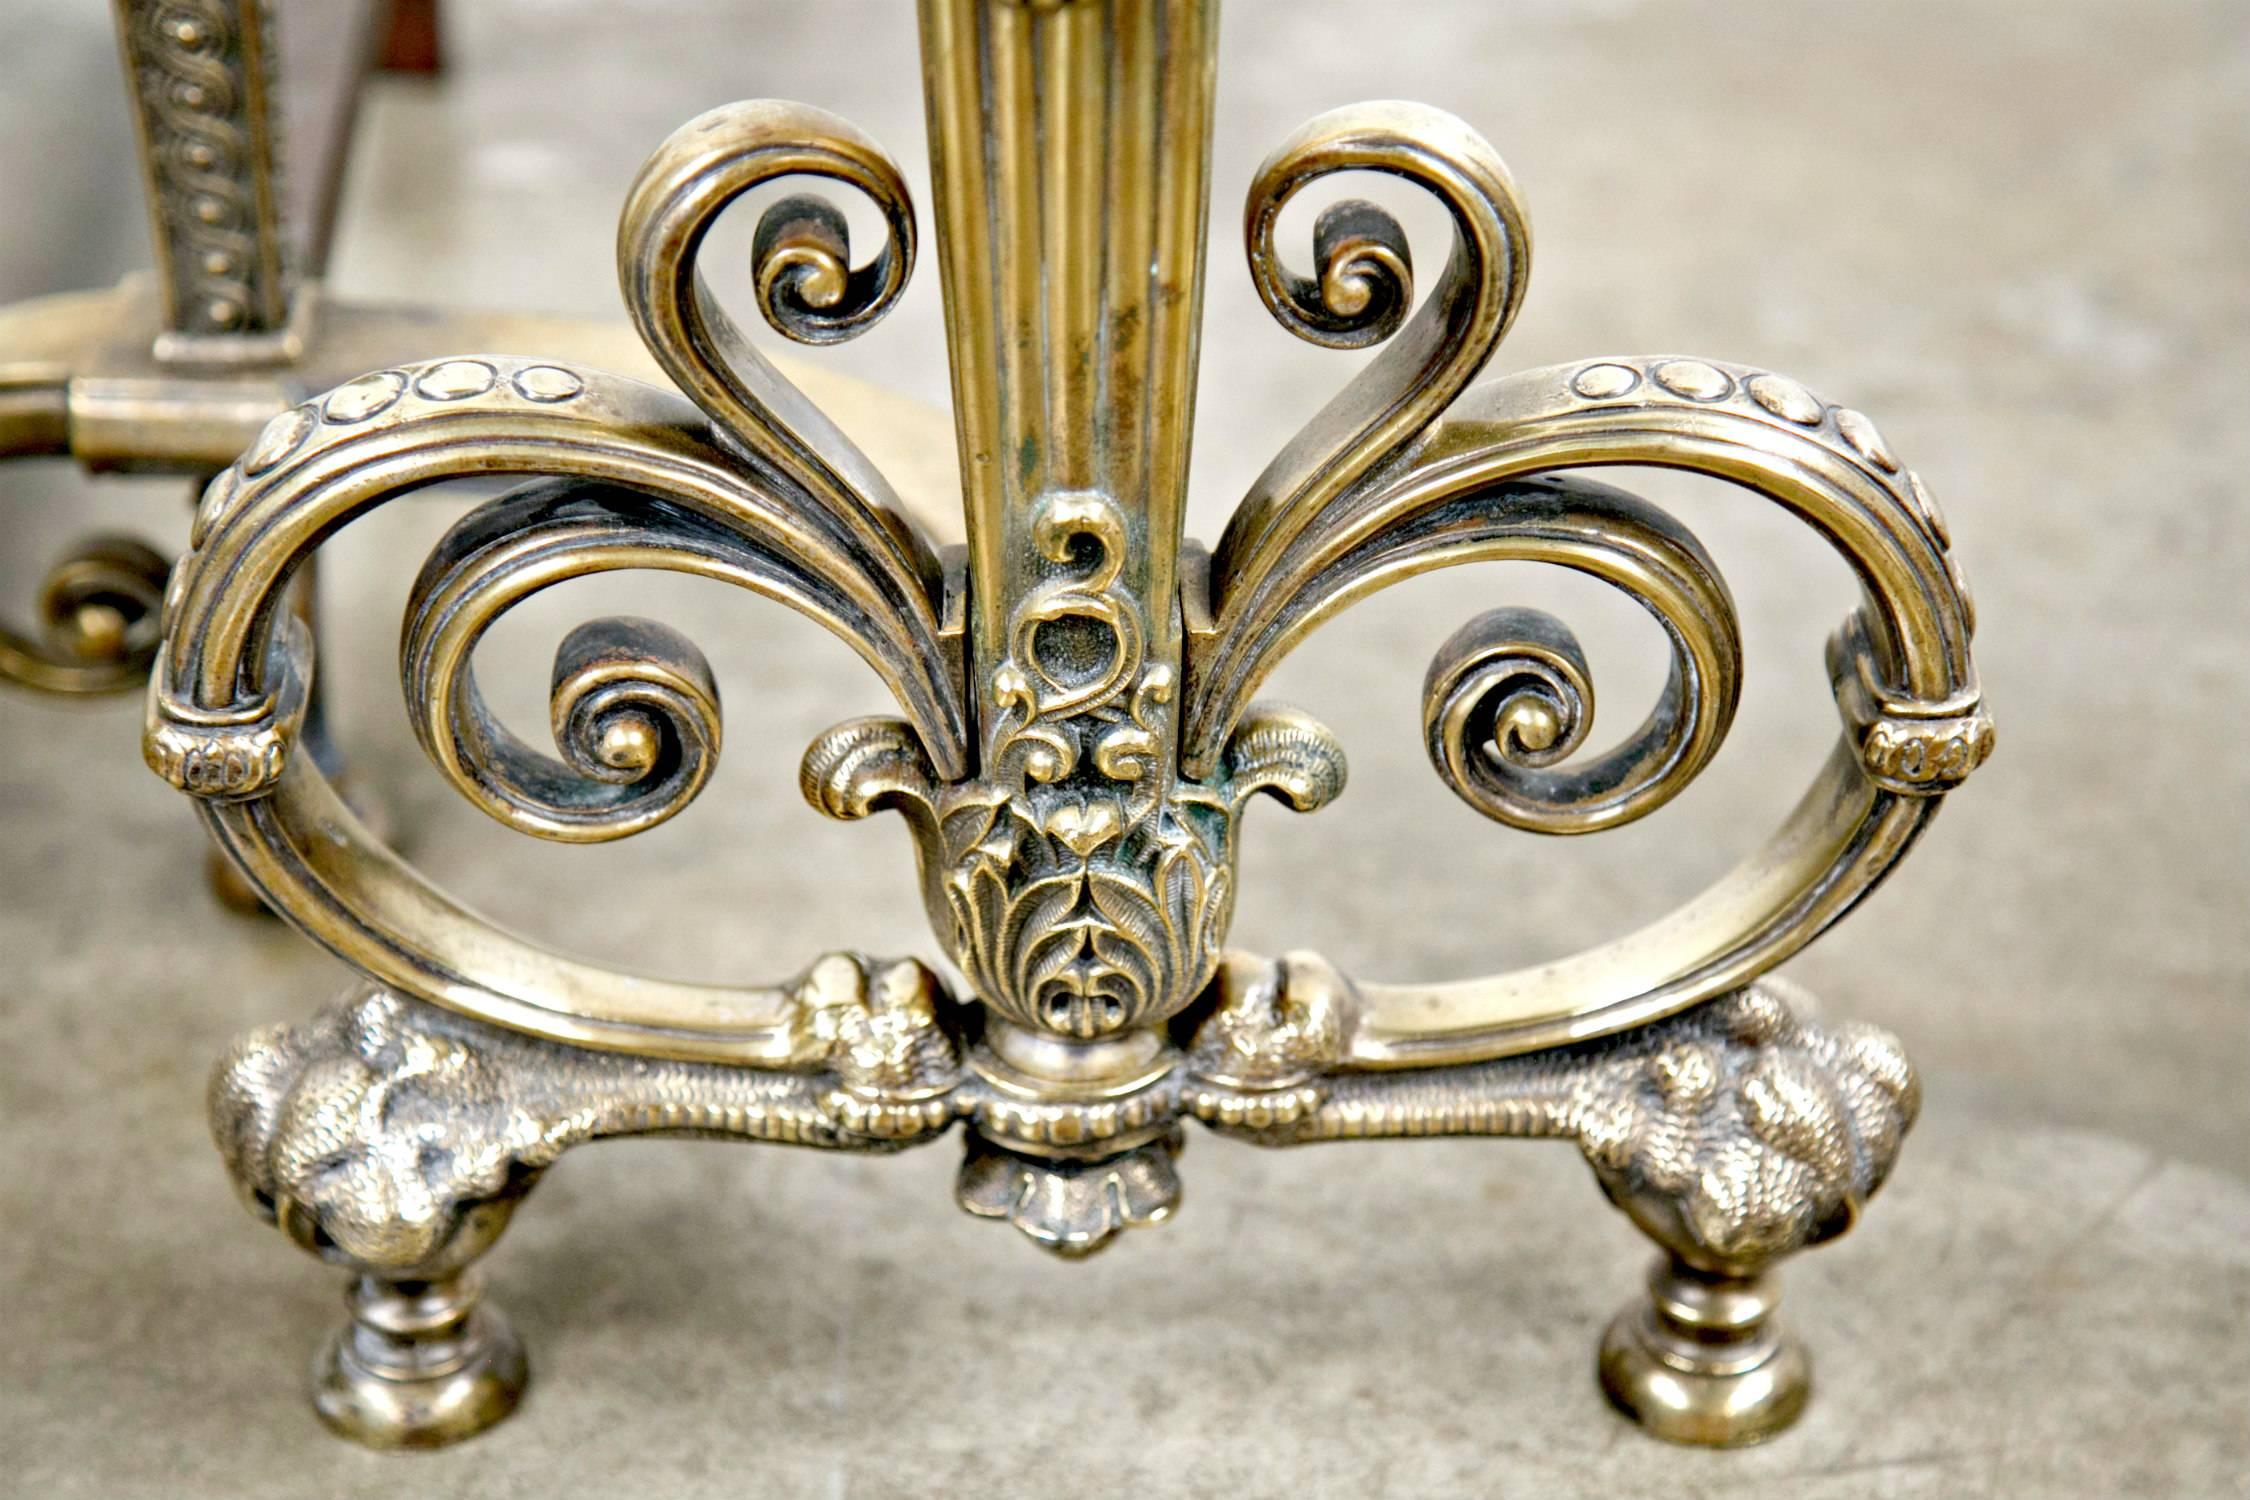 Fine Pair of Brass and Wrought Iron Andirons Attributed to Tiffany Studios For Sale 2